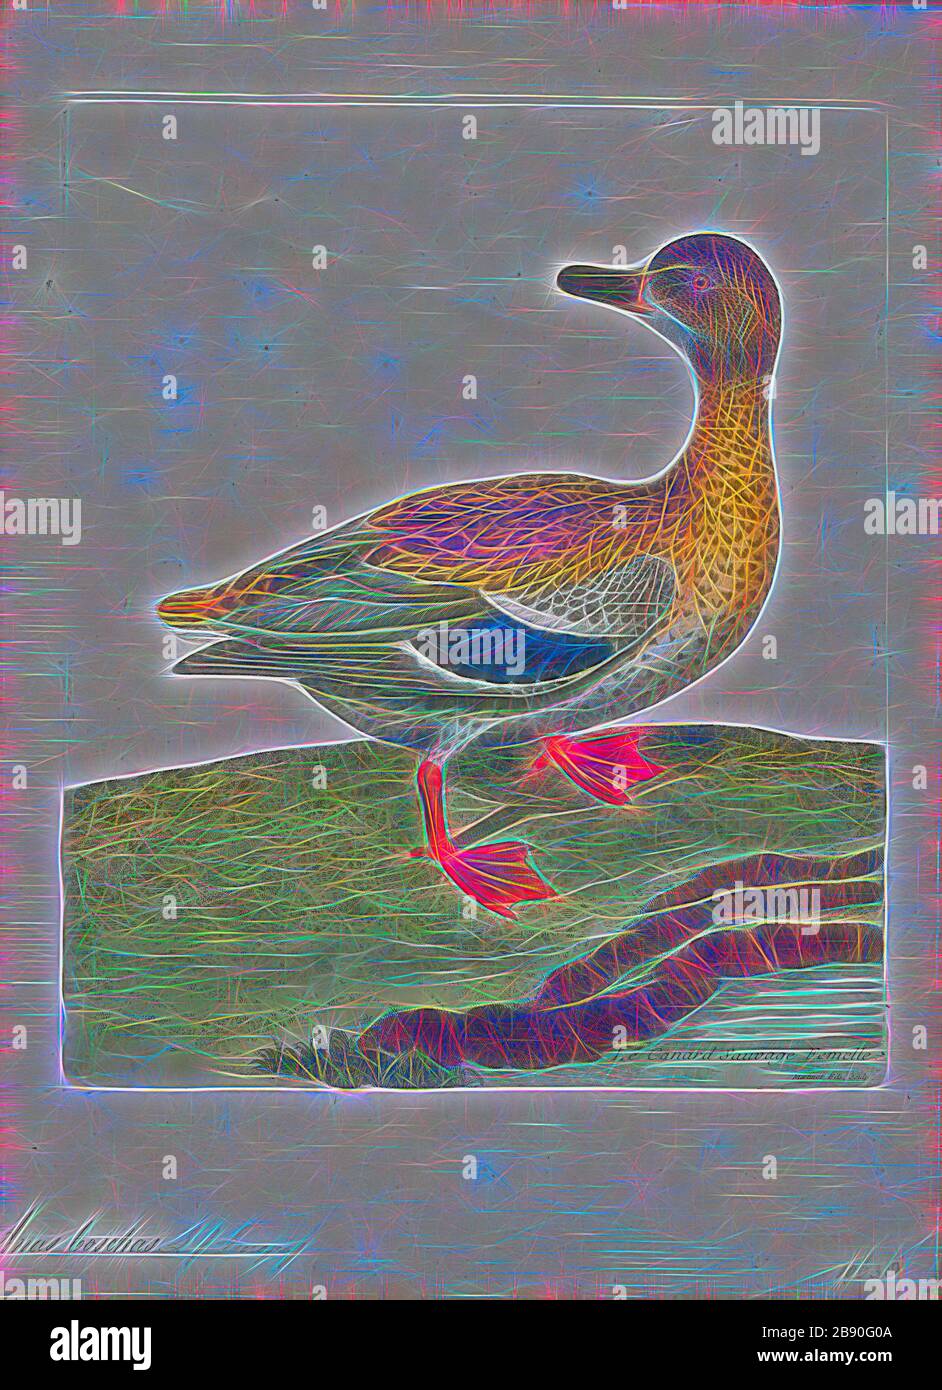 Anas boschas, Print, The mallard (Anas platyrhynchos) is a dabbling duck that breeds throughout the temperate and subtropical Americas, Eurasia, and North Africa and has been introduced to New Zealand, Australia, Peru, Brazil, Uruguay, Argentina, Chile, Colombia, the Falkland Islands, and South Africa. This duck belongs to the subfamily Anatinae of the waterfowl family Anatidae. The male birds (drakes) have a glossy green head and are grey on their wings and belly, while the females (hens or ducks) have mainly brown-speckled plumage. Both sexes have an area of white-bordered black or iridescen Stock Photo